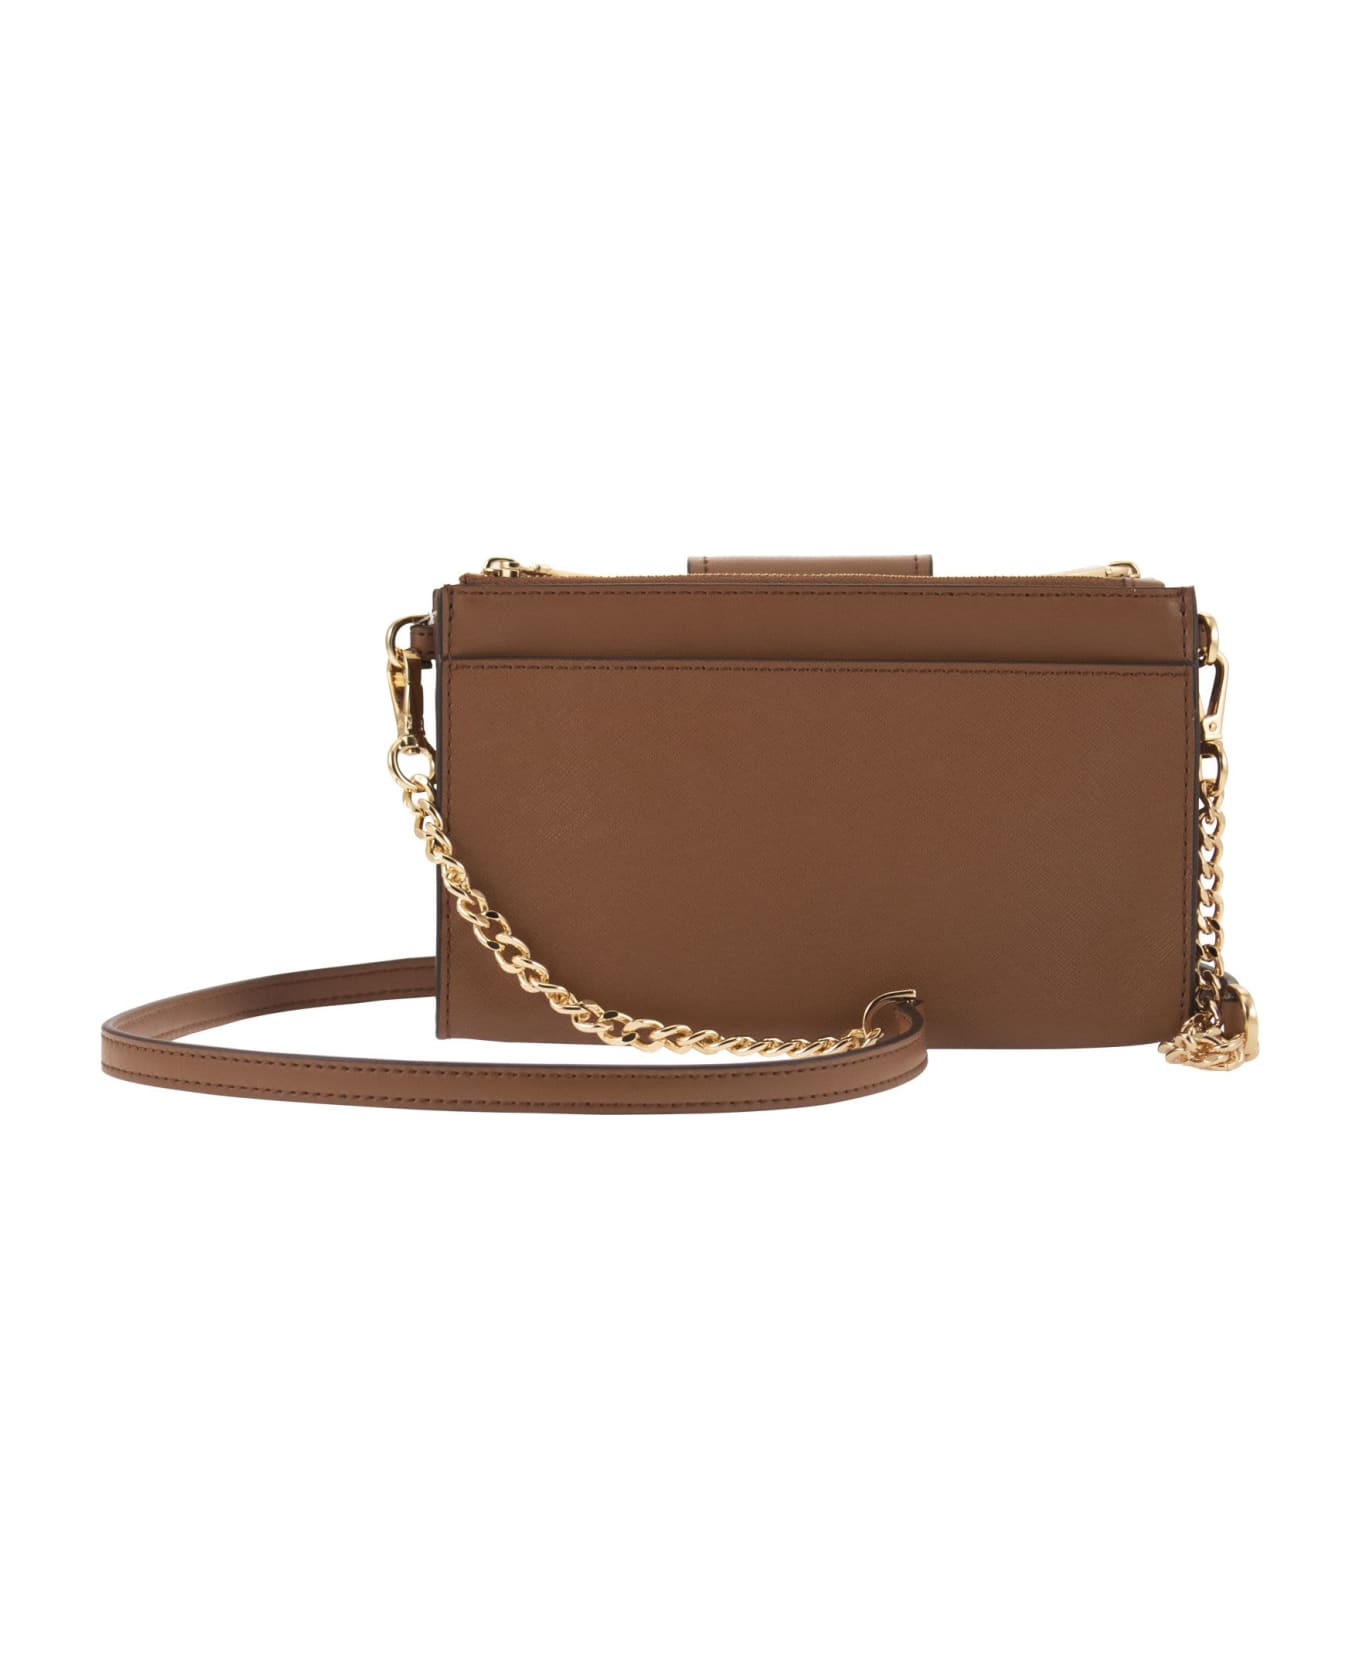 Michael Kors Ruby Bag In Saffiano Leather - Brown